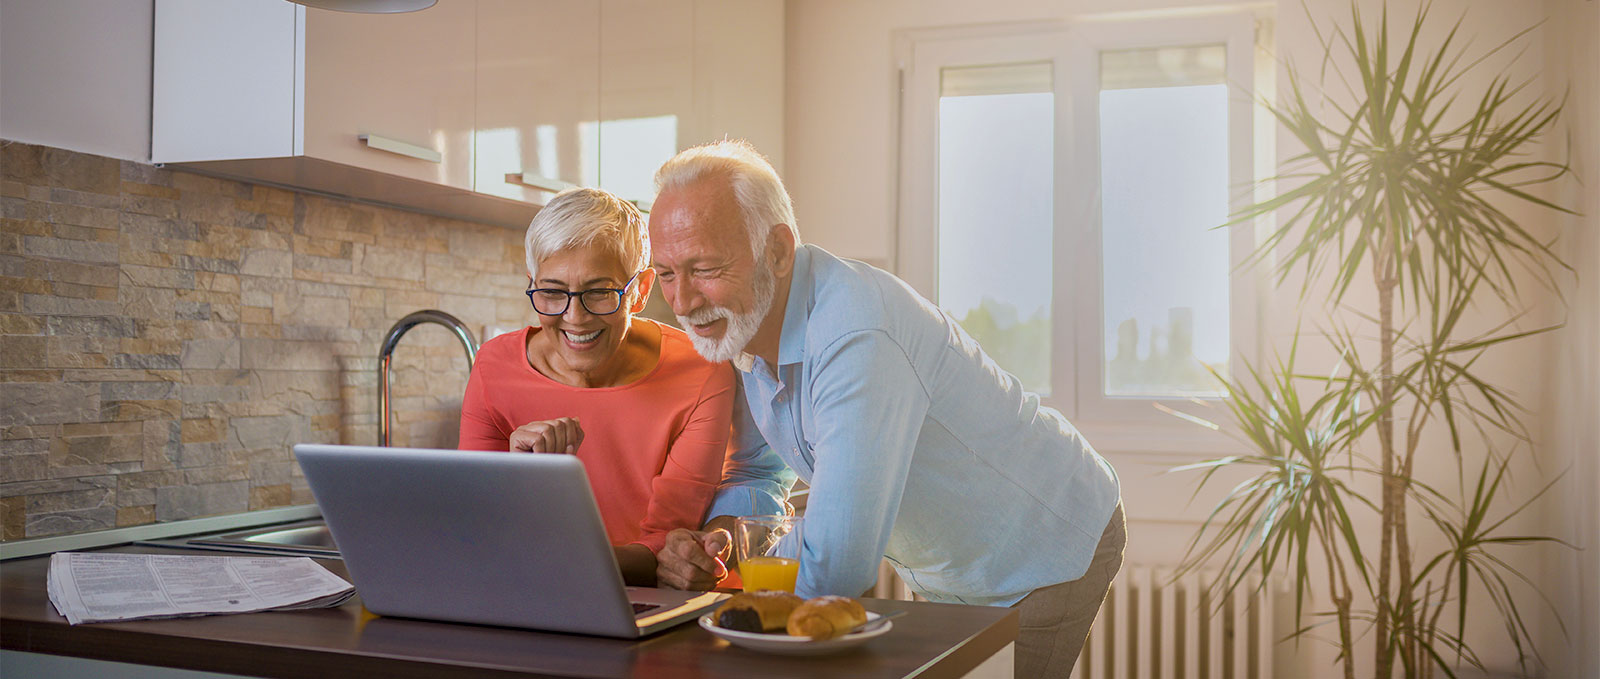 Mature couple staying using their laptop in their kitchen.